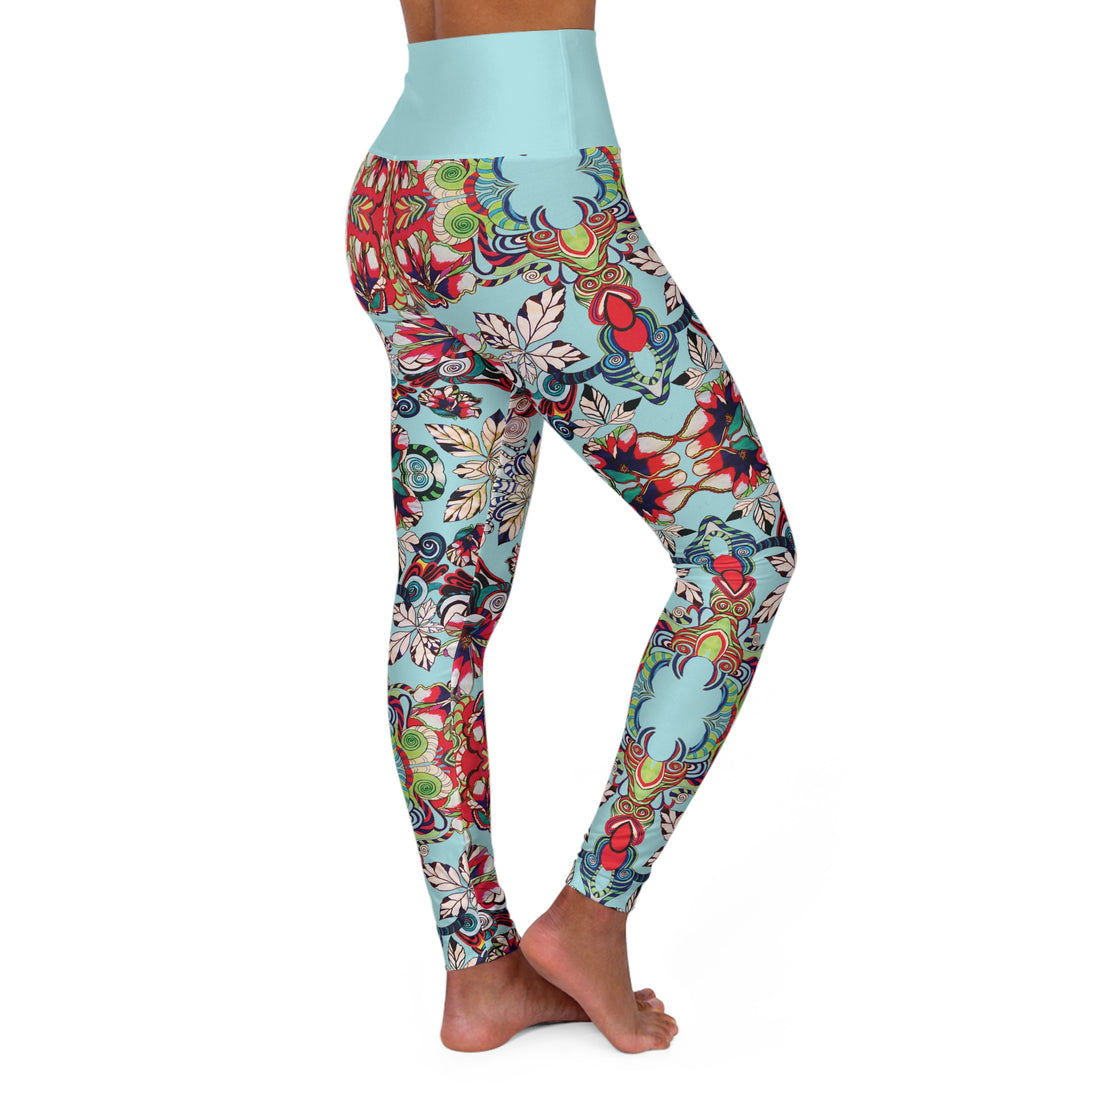 Icy Blue Graphic Floral Yoga Leggings